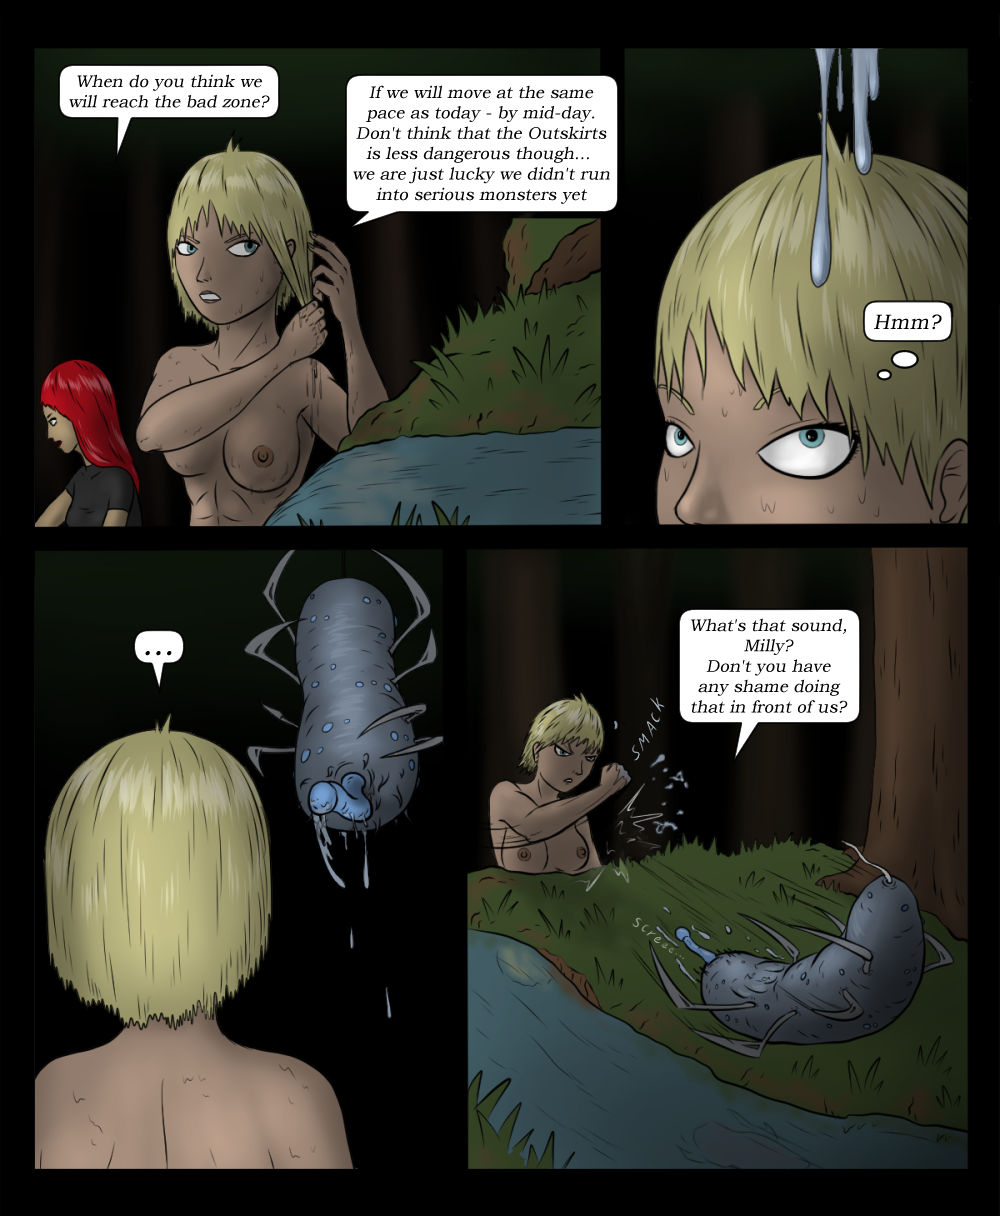 Page 47 - A friendly forest dweller appears